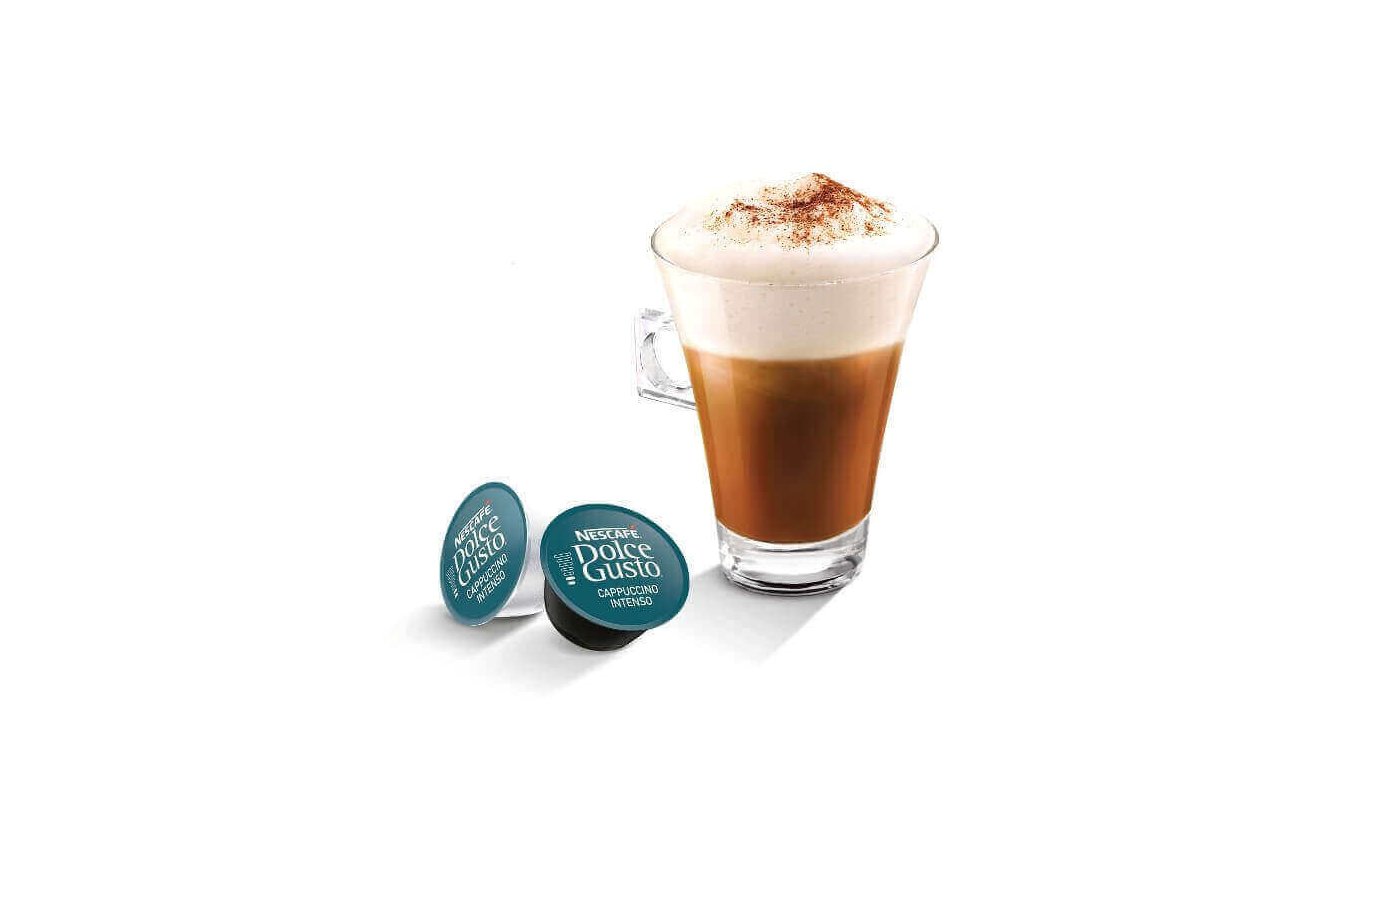 Nescafe dolce cappuccino. Капсулы Nescafe Dolce gusto Cappuccino. Капсулы Dolce gusto Cappuccino. Капучино Нескафе капсулы. Нескафе Дольче густо капсулы капучино.